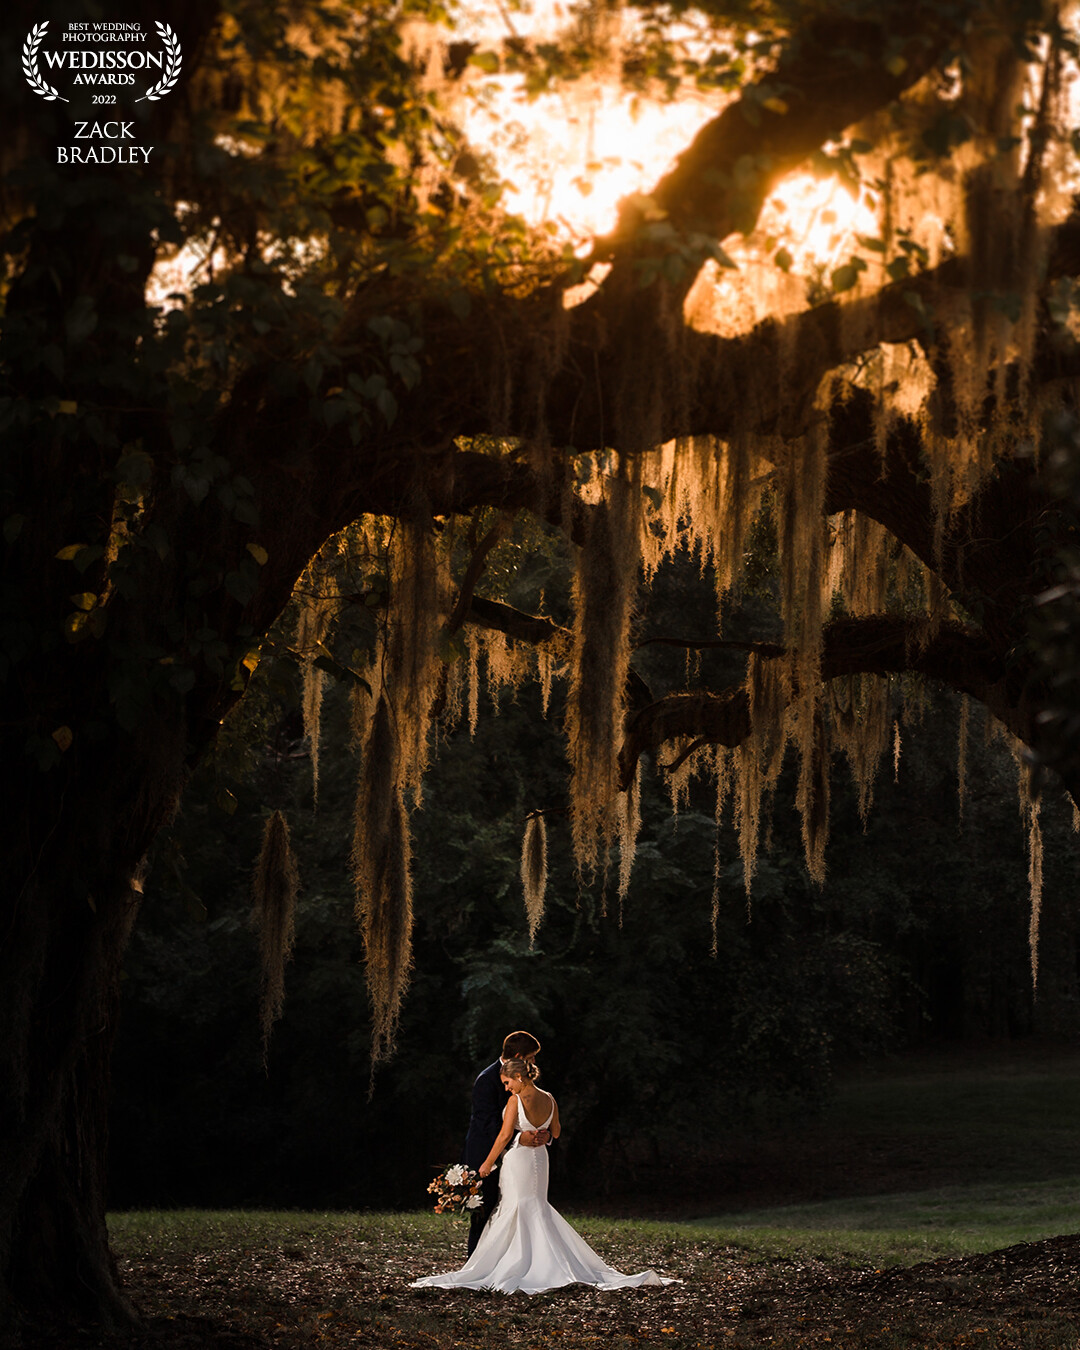 Taking a moment to get away from the crowd at sunset and just be with each other under the mossy oaks. I highly recommend setting aside some time for you and your partner to be alone and reflect on the day before it's over.